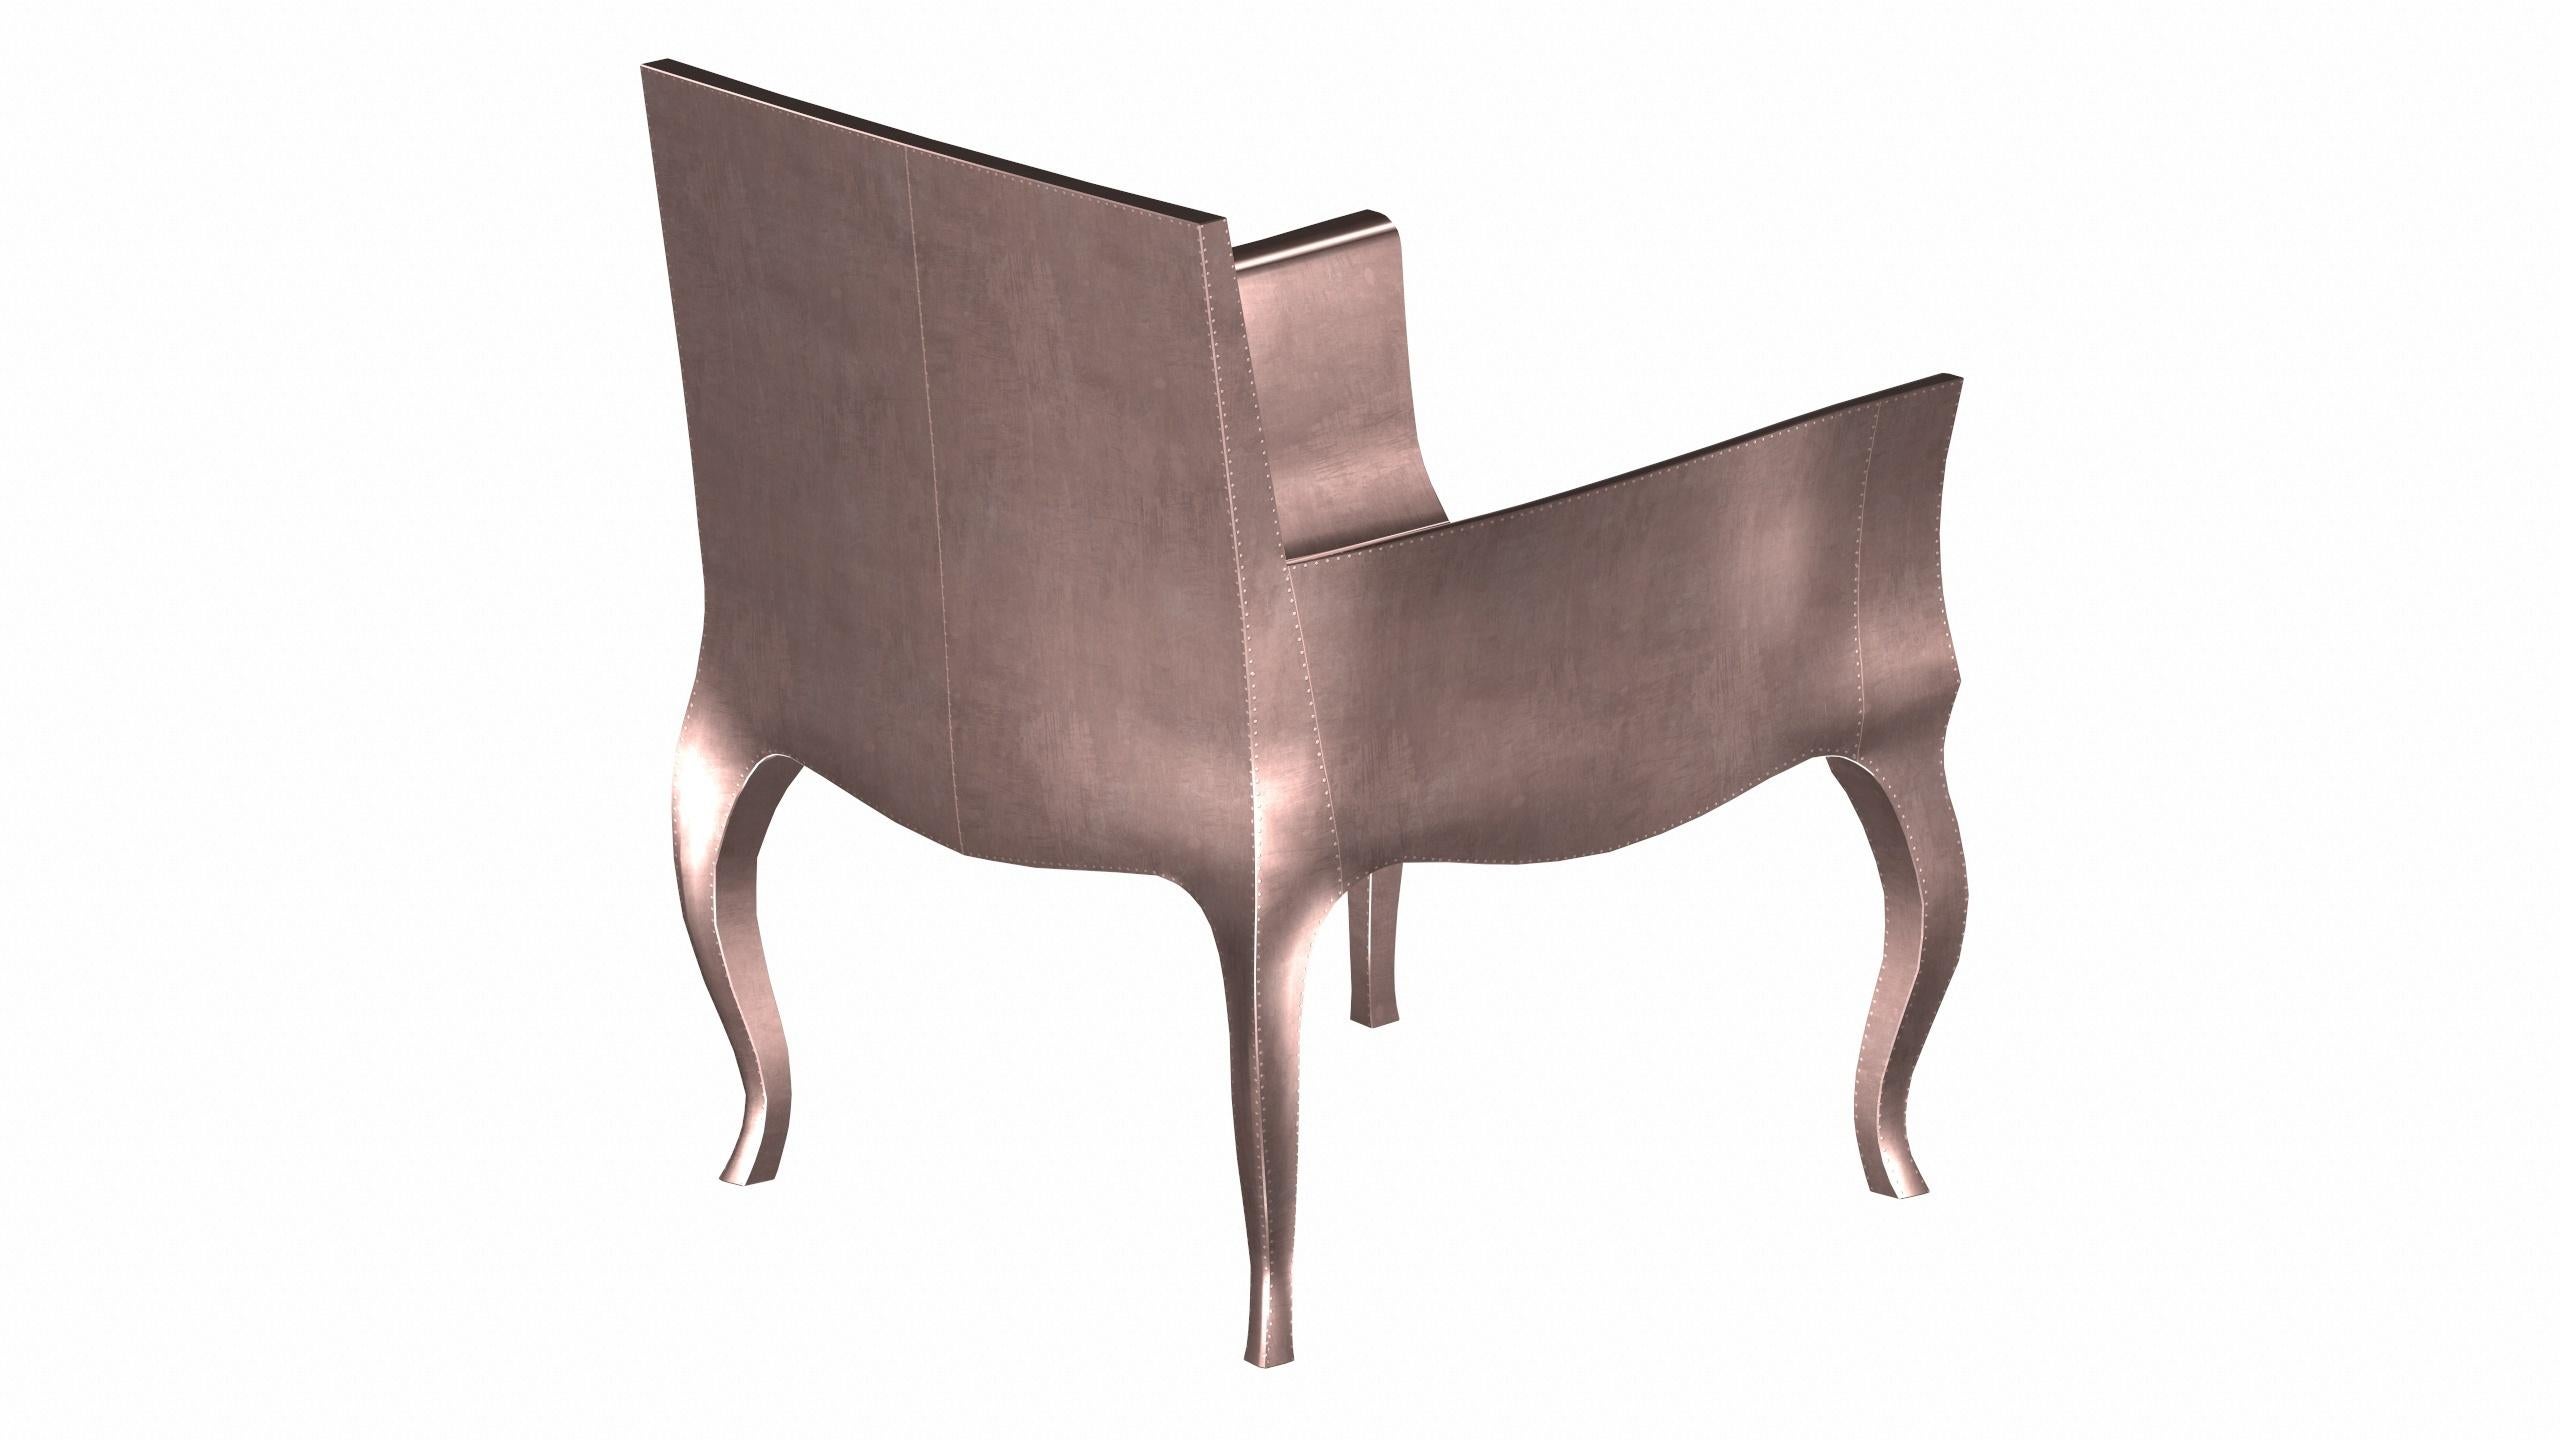 Indian Art Deco Lounge Chair in Smooth Copper by Paul Mathieu for S. Odegard For Sale